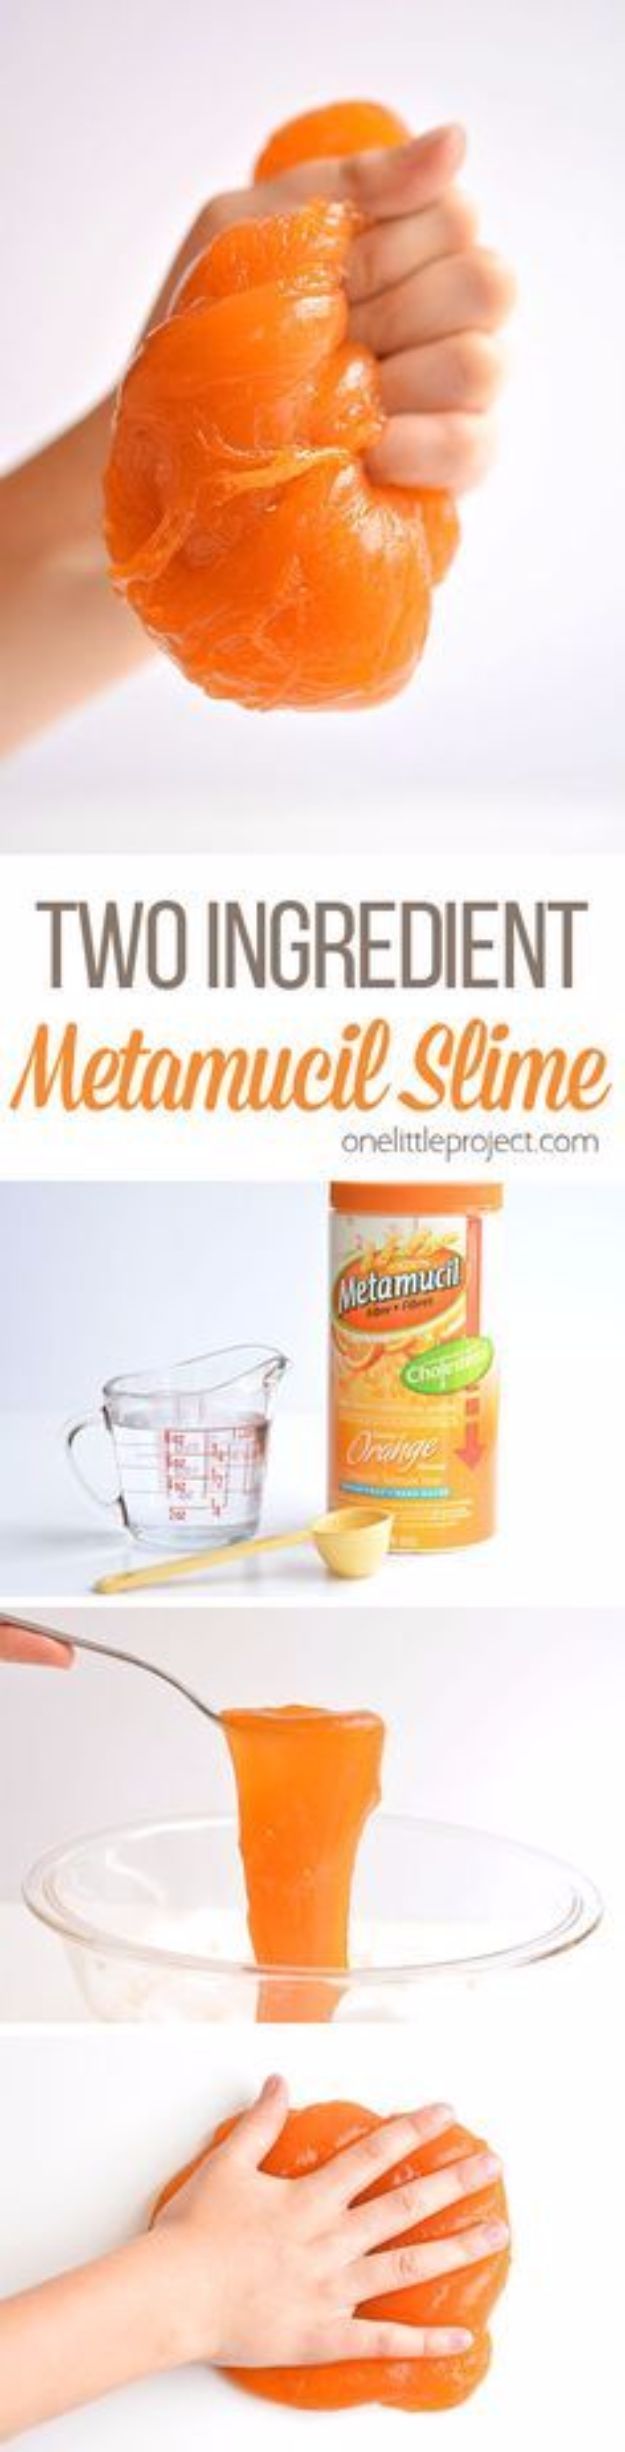 Borax Free Slime Recipes - 2-Ingredient Metamucil Slime - Safe Slimes To Make Without Glue - How To Make Fluffy Slime With Shaving Cream - Easy 3 Ingredients Glitter Slime, Clear, Galaxy, Best DIY Slime Tutorials With Step by Step Instructions #slimerecipes #slime #kidscrafts #teencrafts